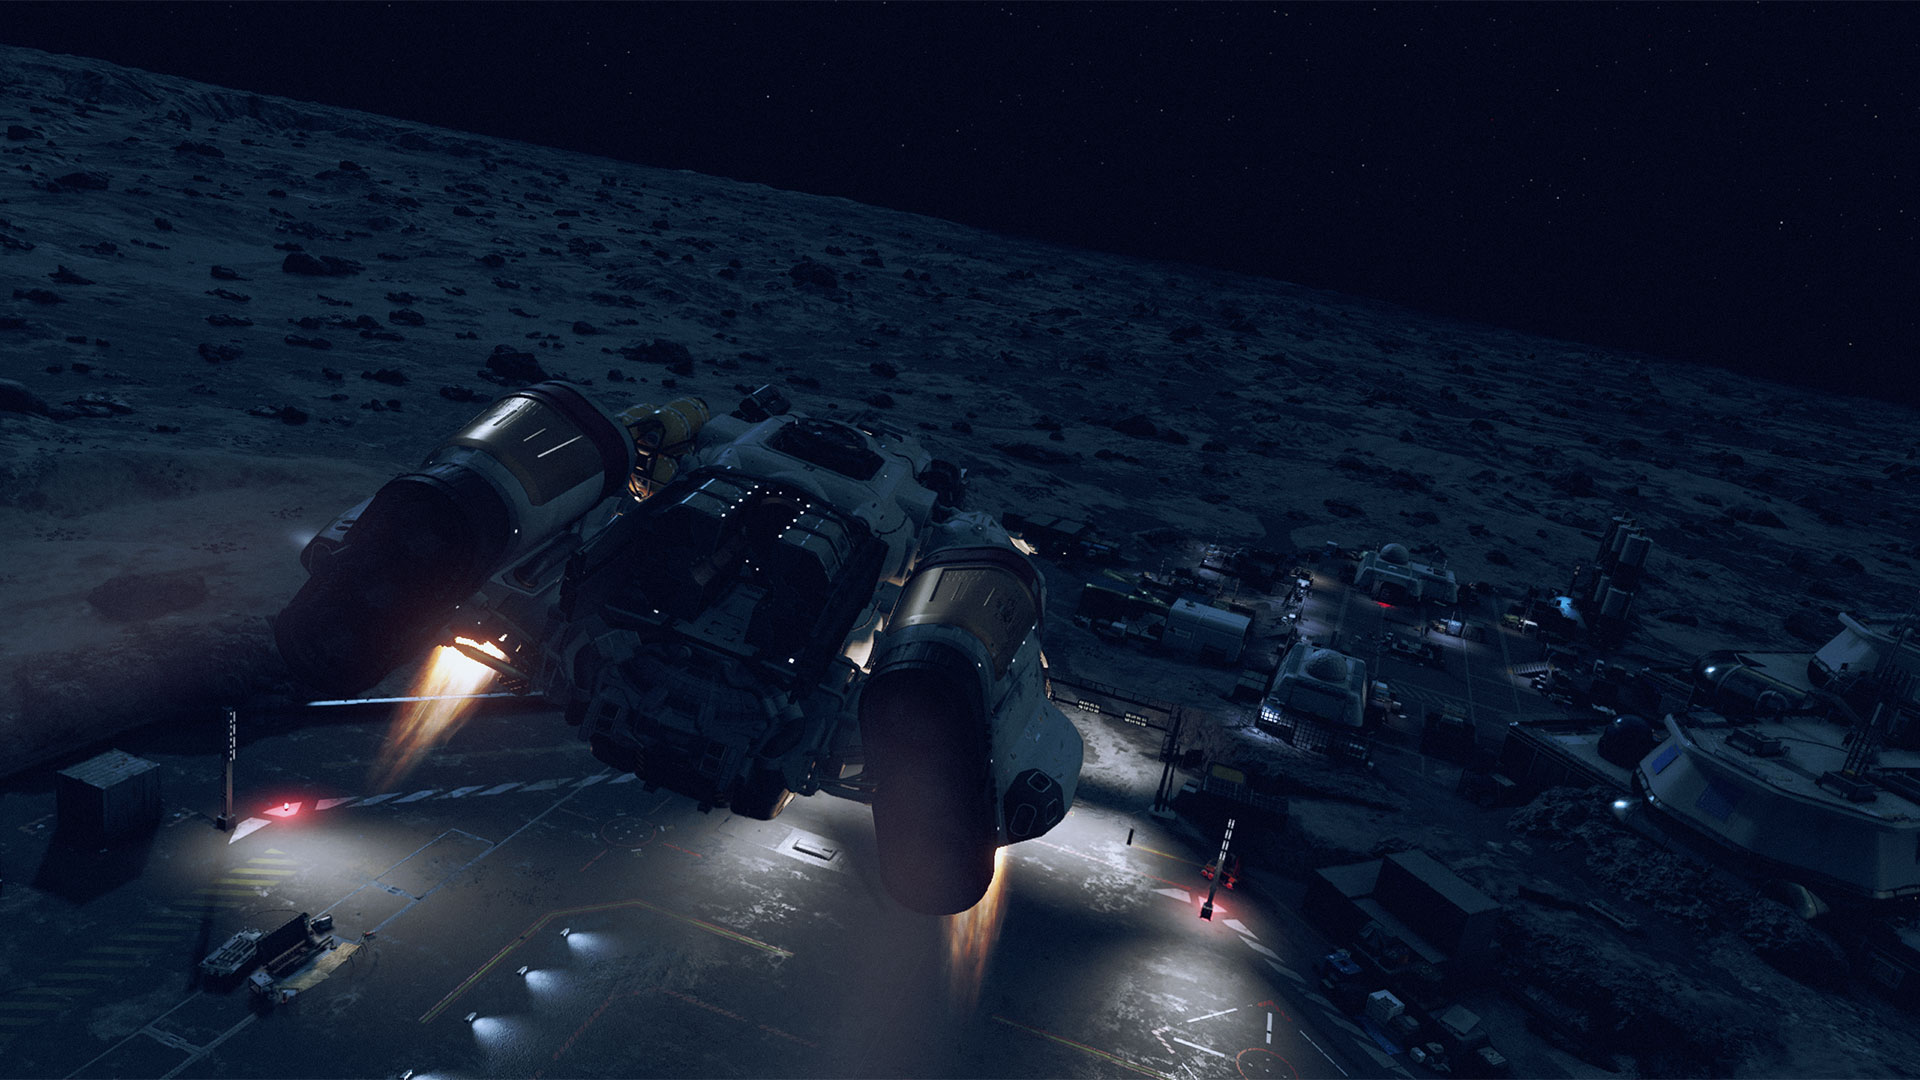 Starfield offers a sprawling adventure, which might come across as desolate to certain players